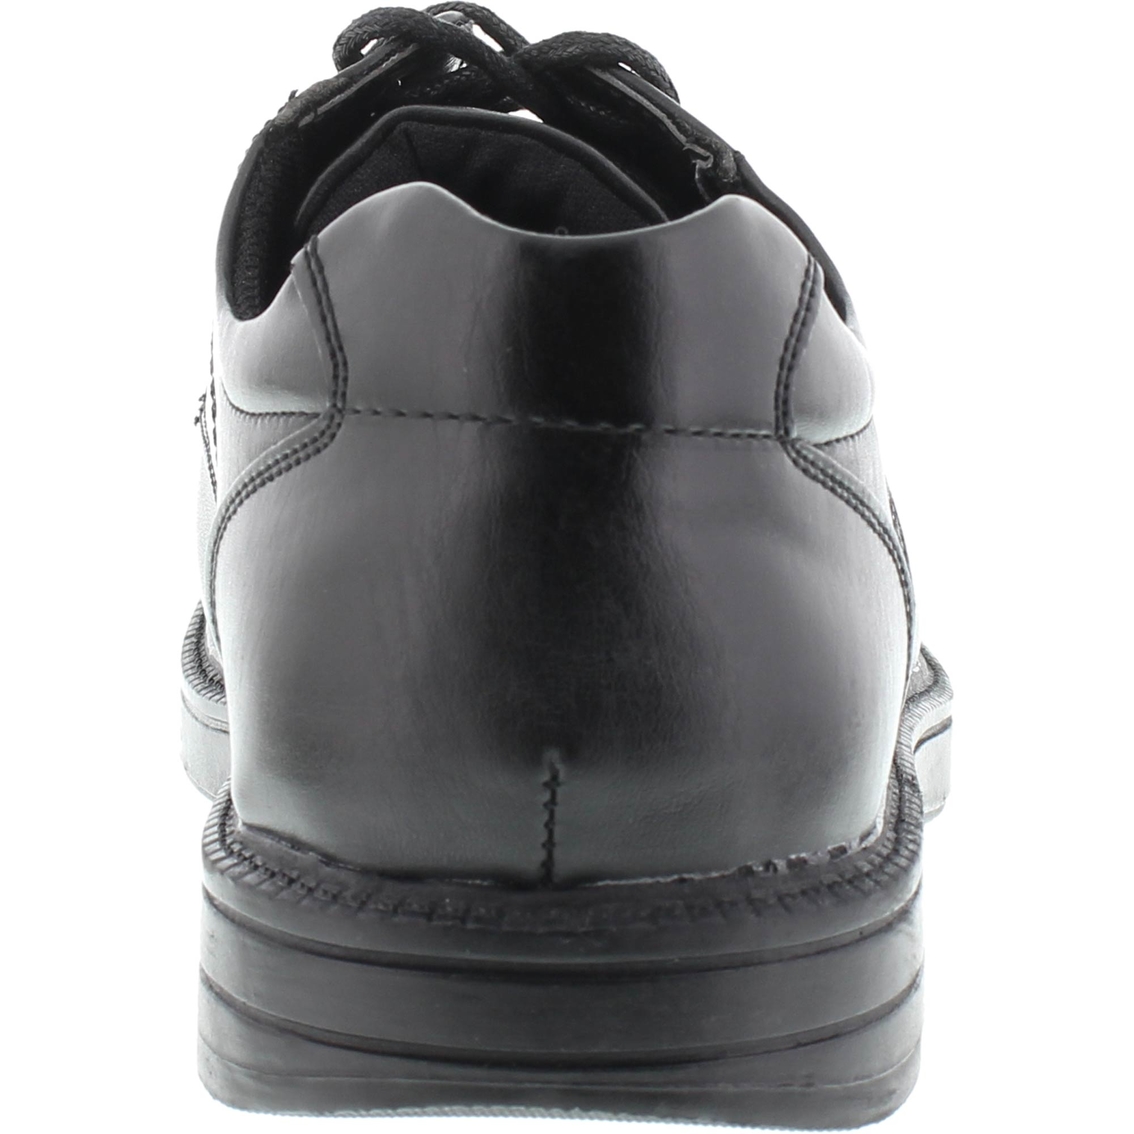 Deer Stags Nu Times Lace Up Oxford Shoes - Image 6 of 7